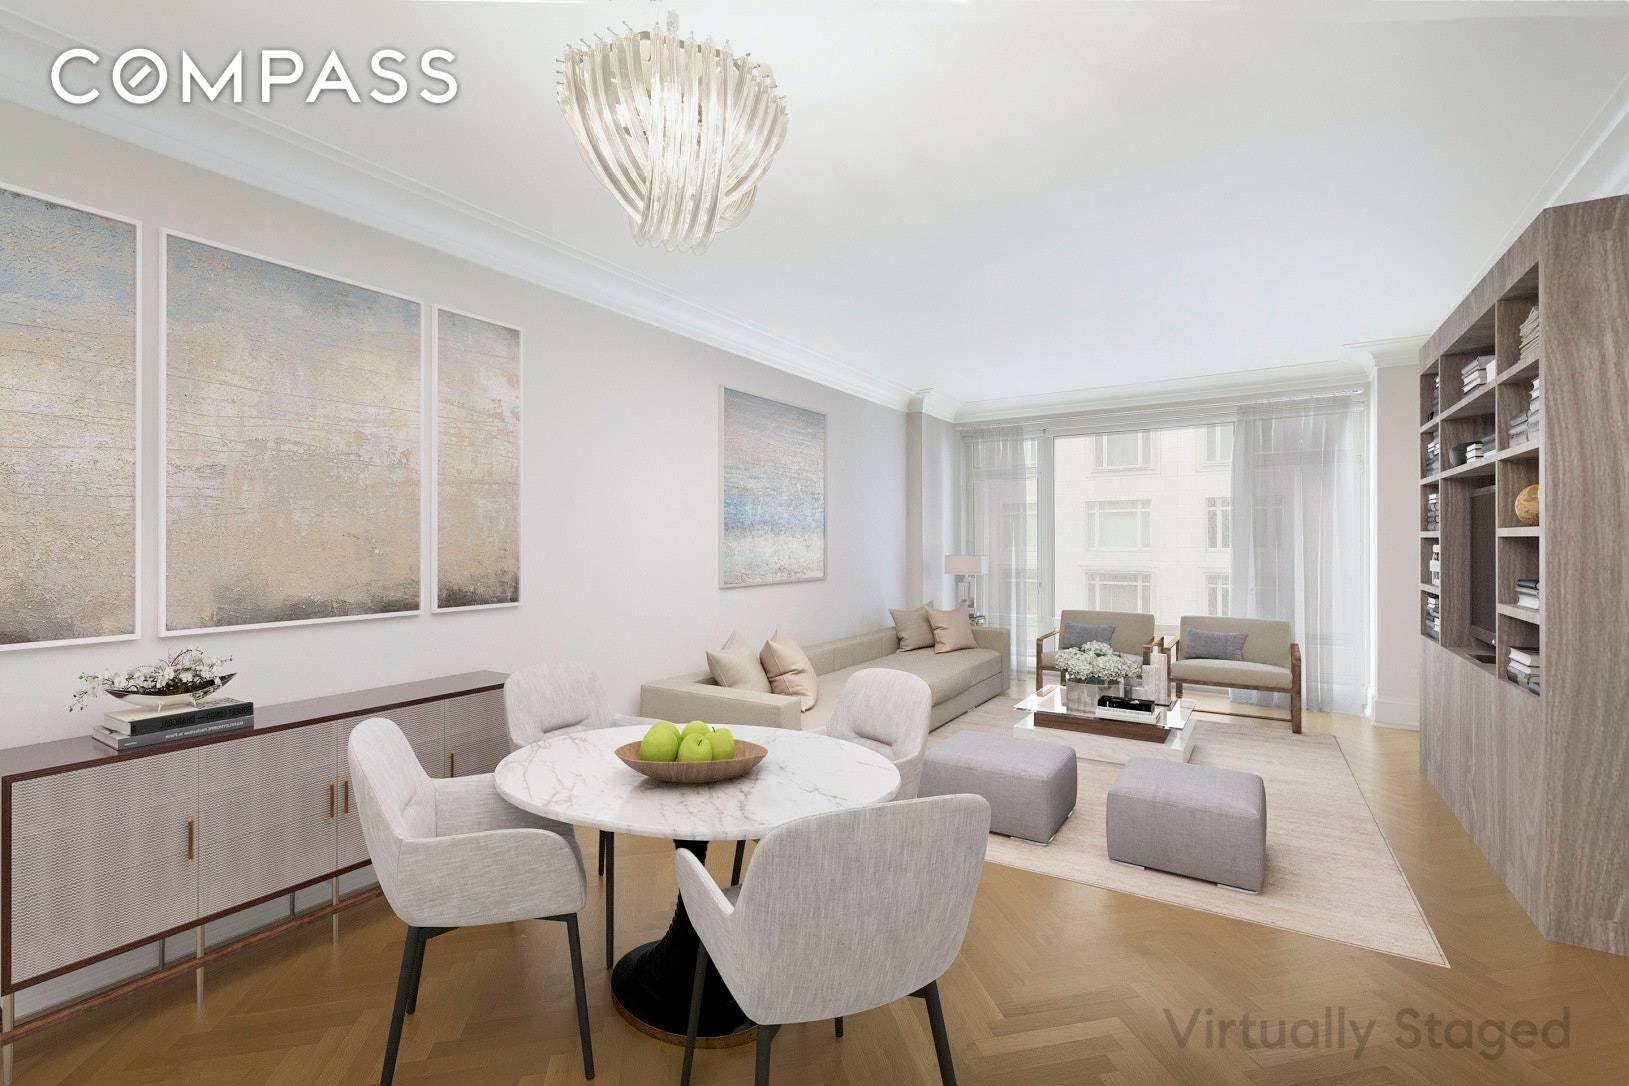 1 BD Home Office in 15 CPW Magnificent 1, 342 square foot condo in 15 Central Park West.